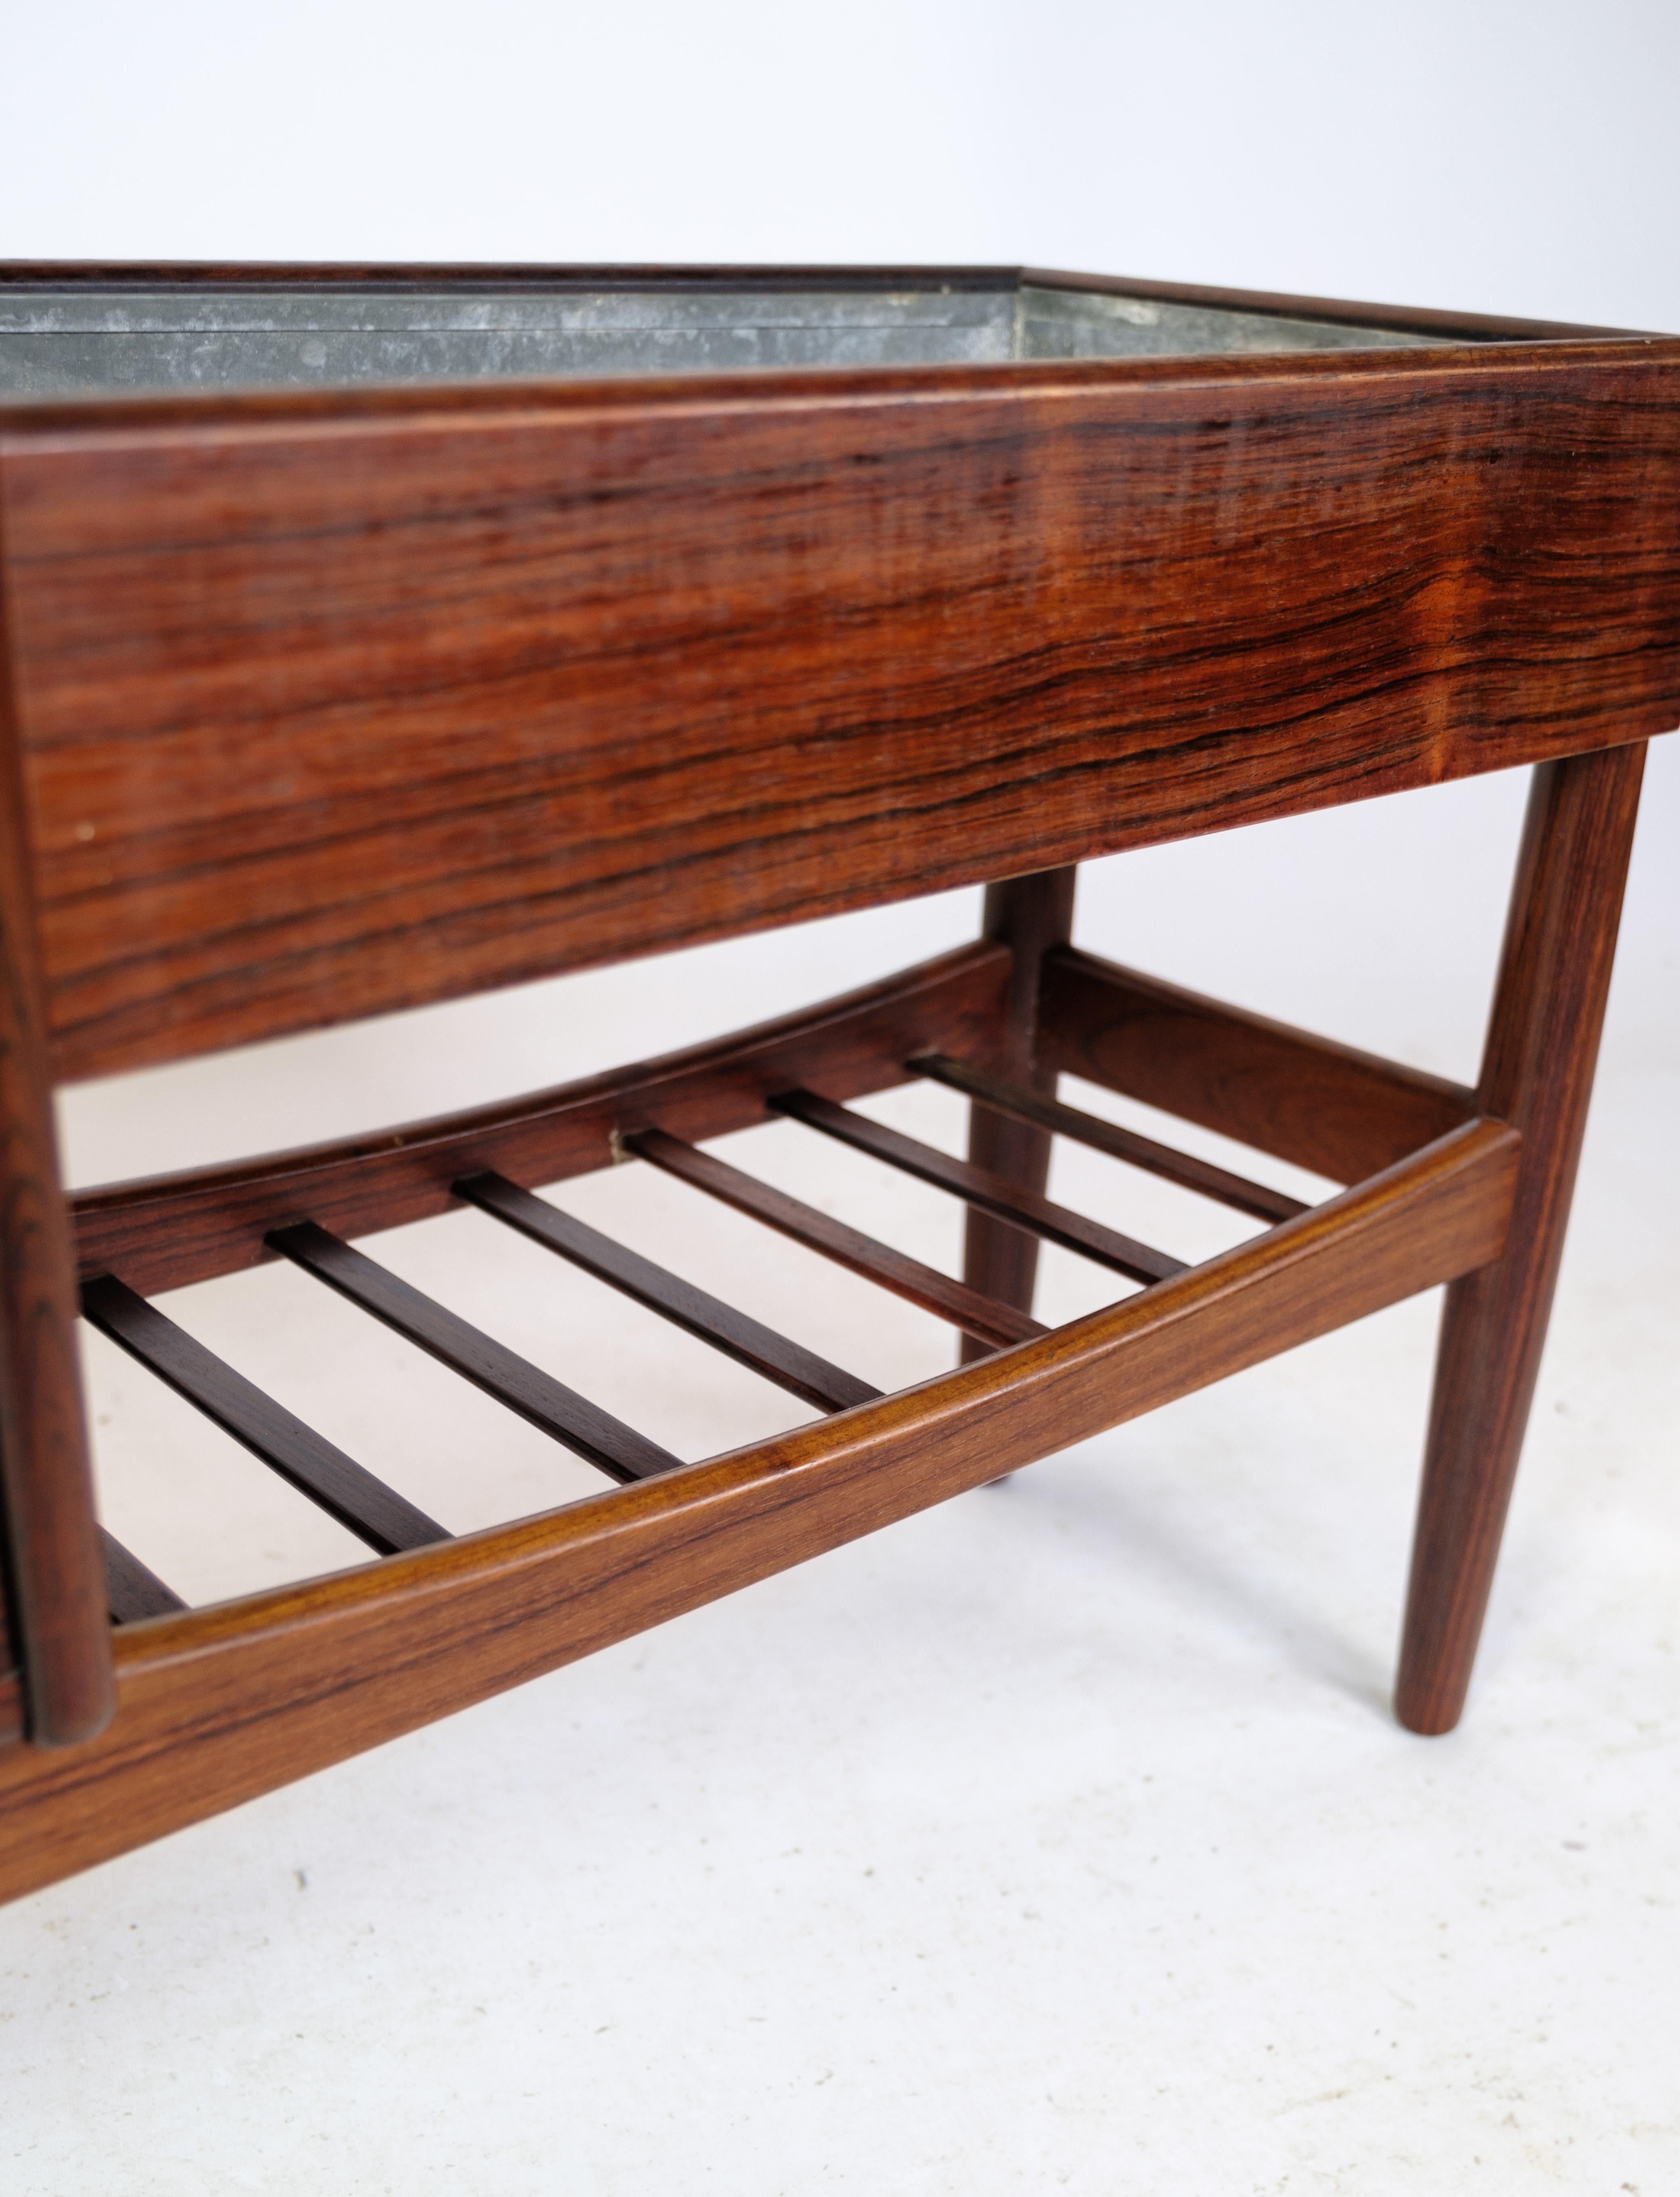 Planter in Rosewood Model 26 by Arne Wahl Iversen From 1959 In Excellent Condition For Sale In Lejre, DK